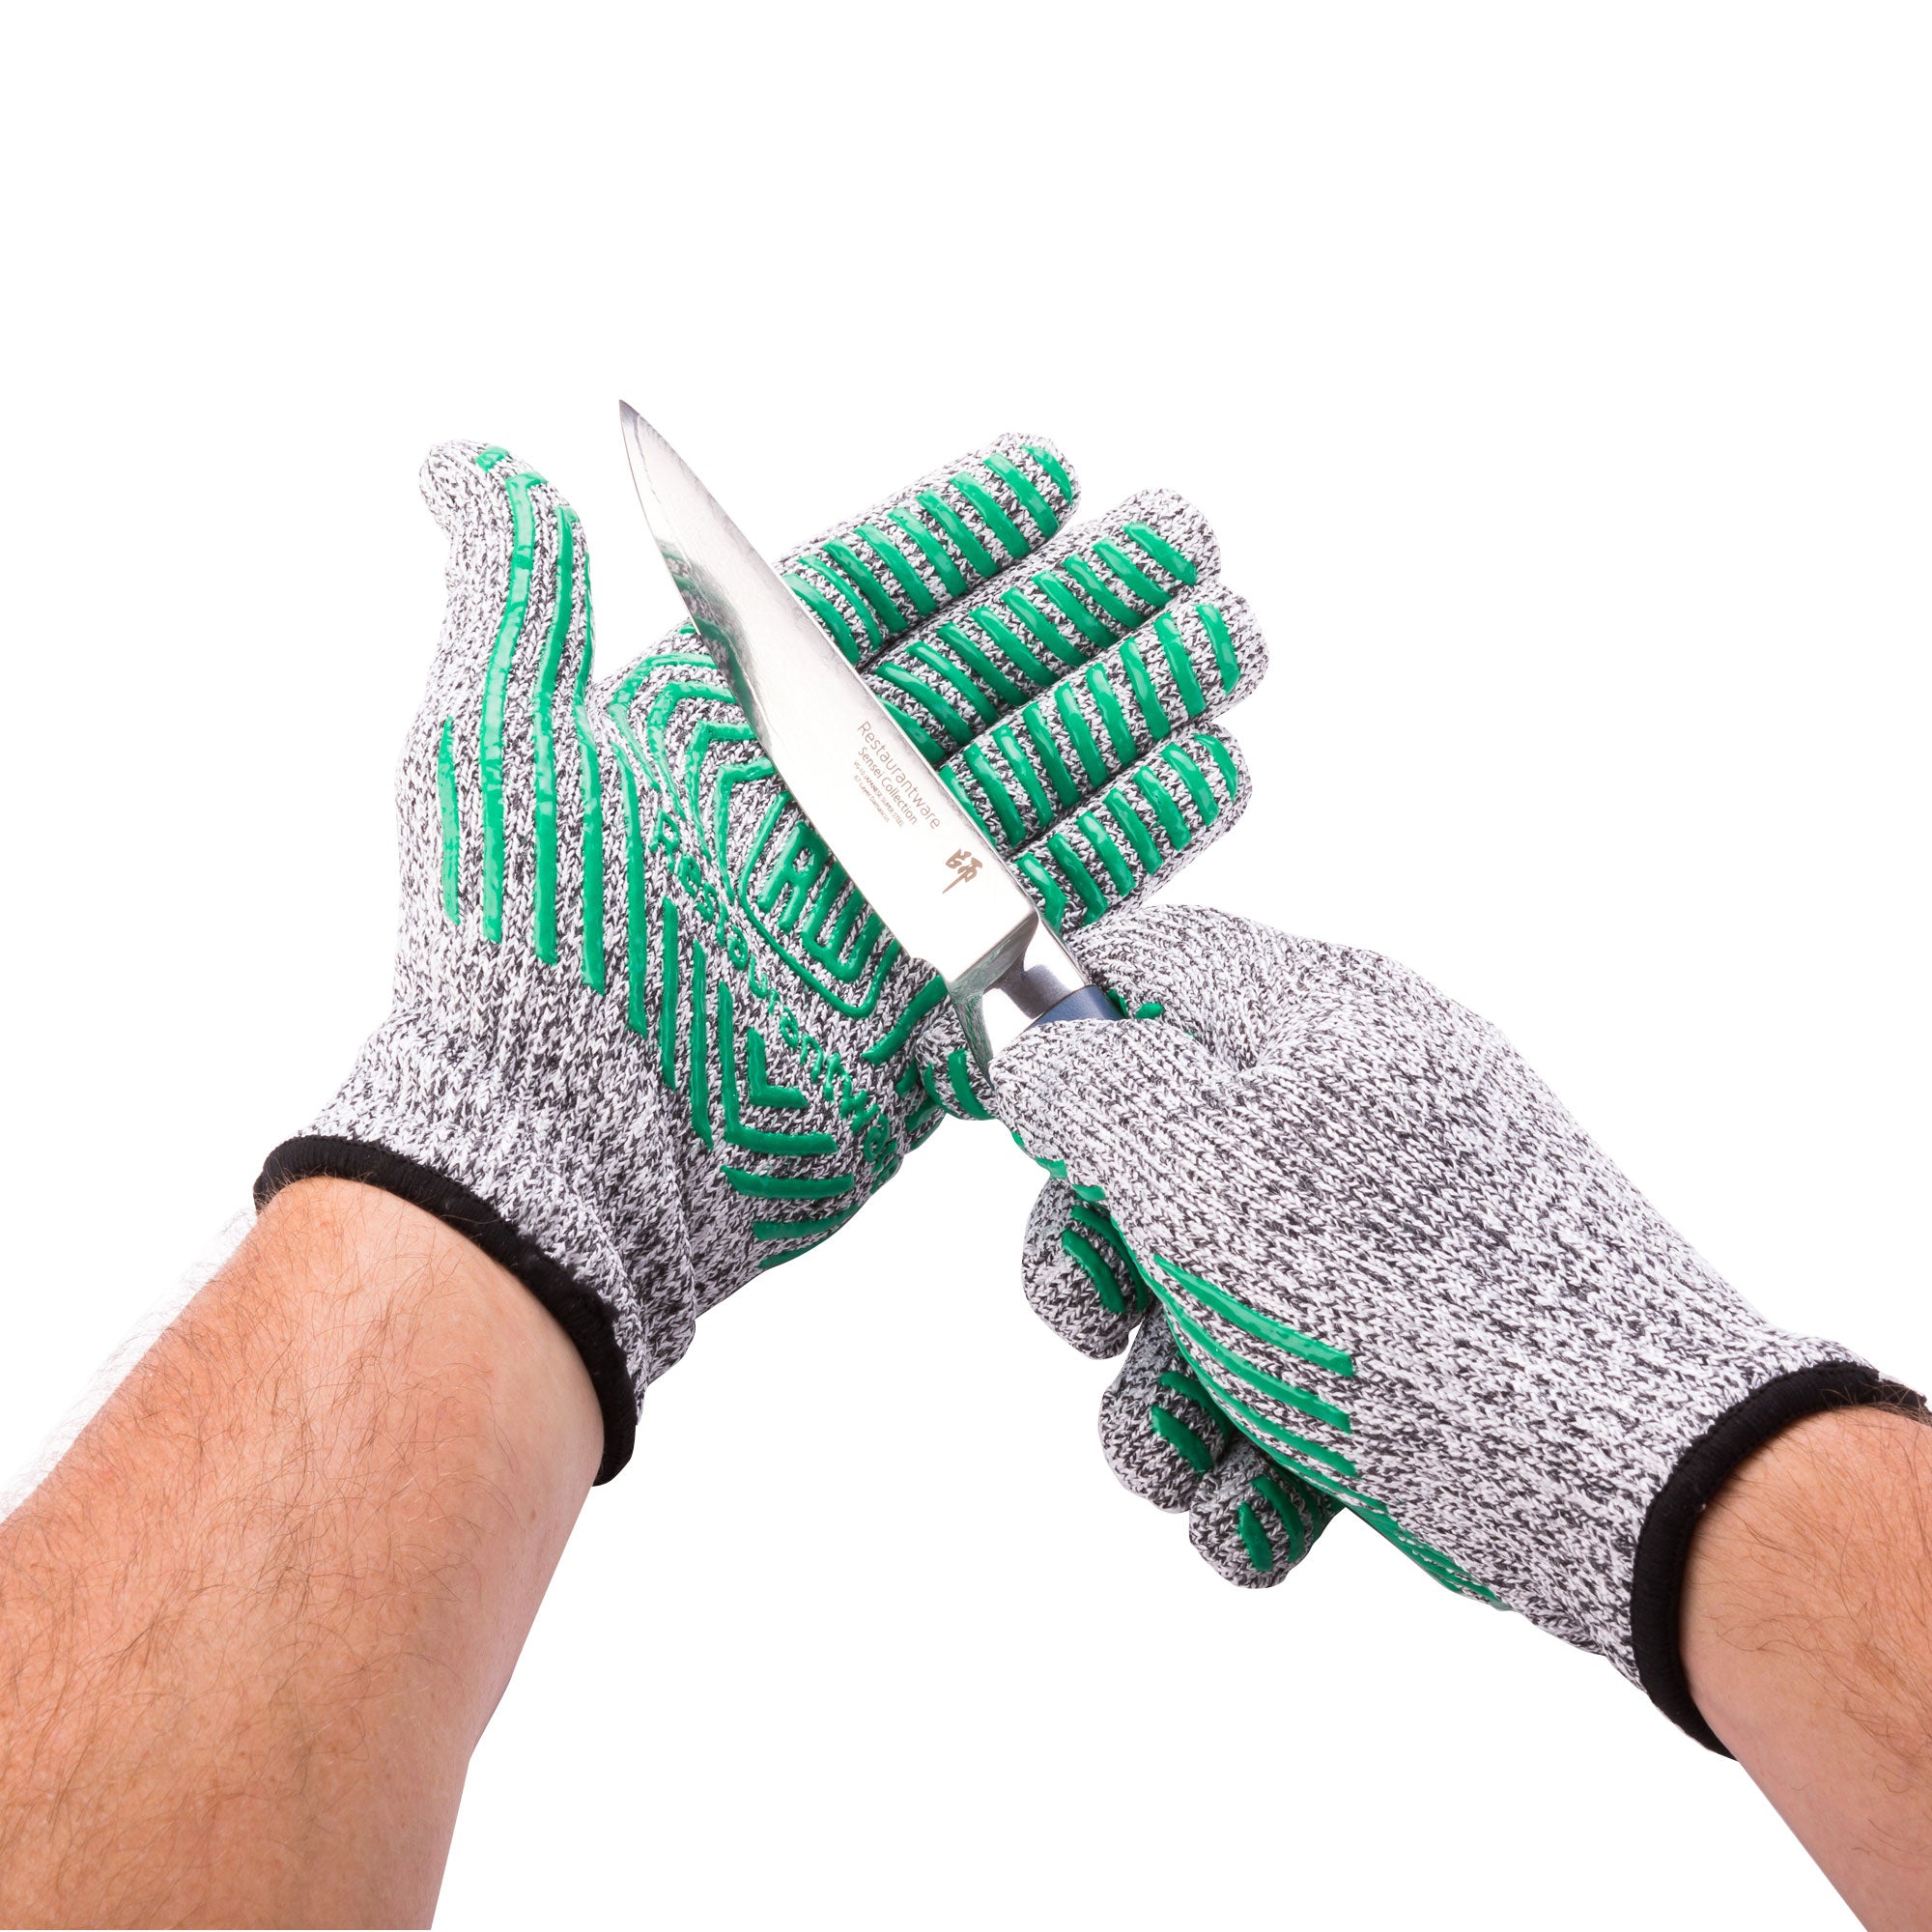 Food Grade Gloveshigh-strength Hppe Level 5 Anti-cut Gloves For